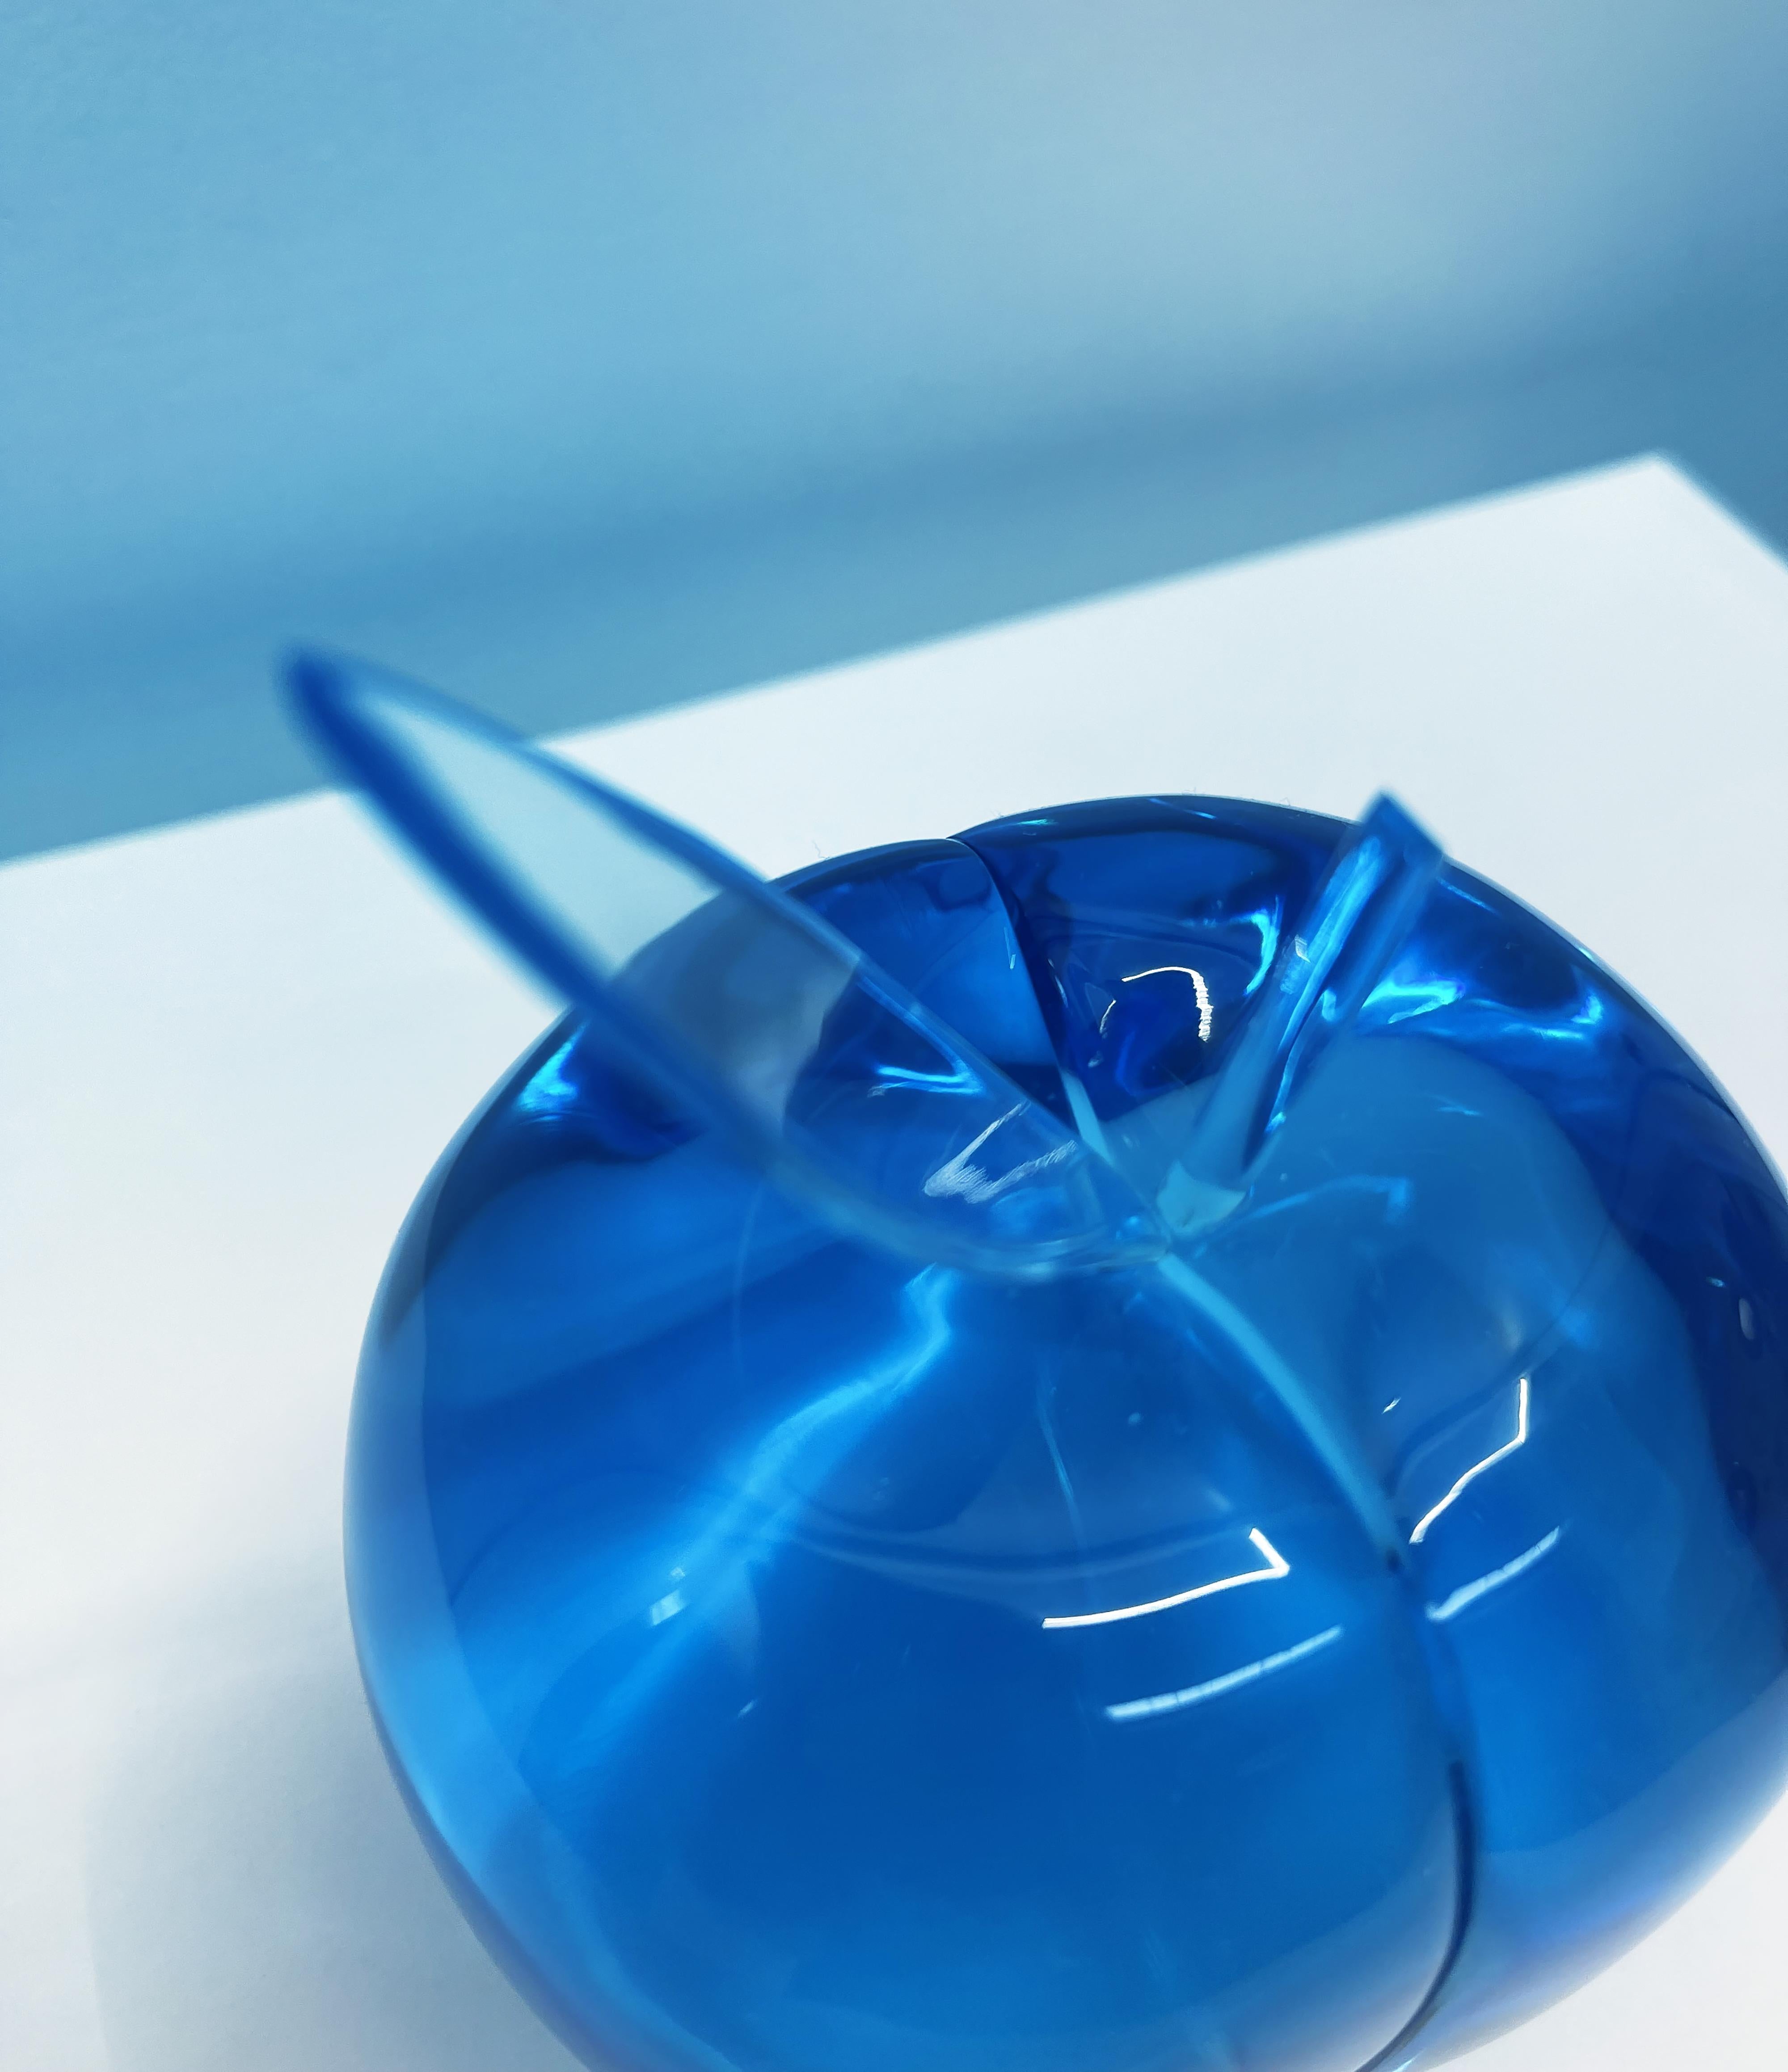 Italian Contemporary 'Apple' Sculpture Blue Crystal Handcrafted in Italy by Ghirò Studio For Sale